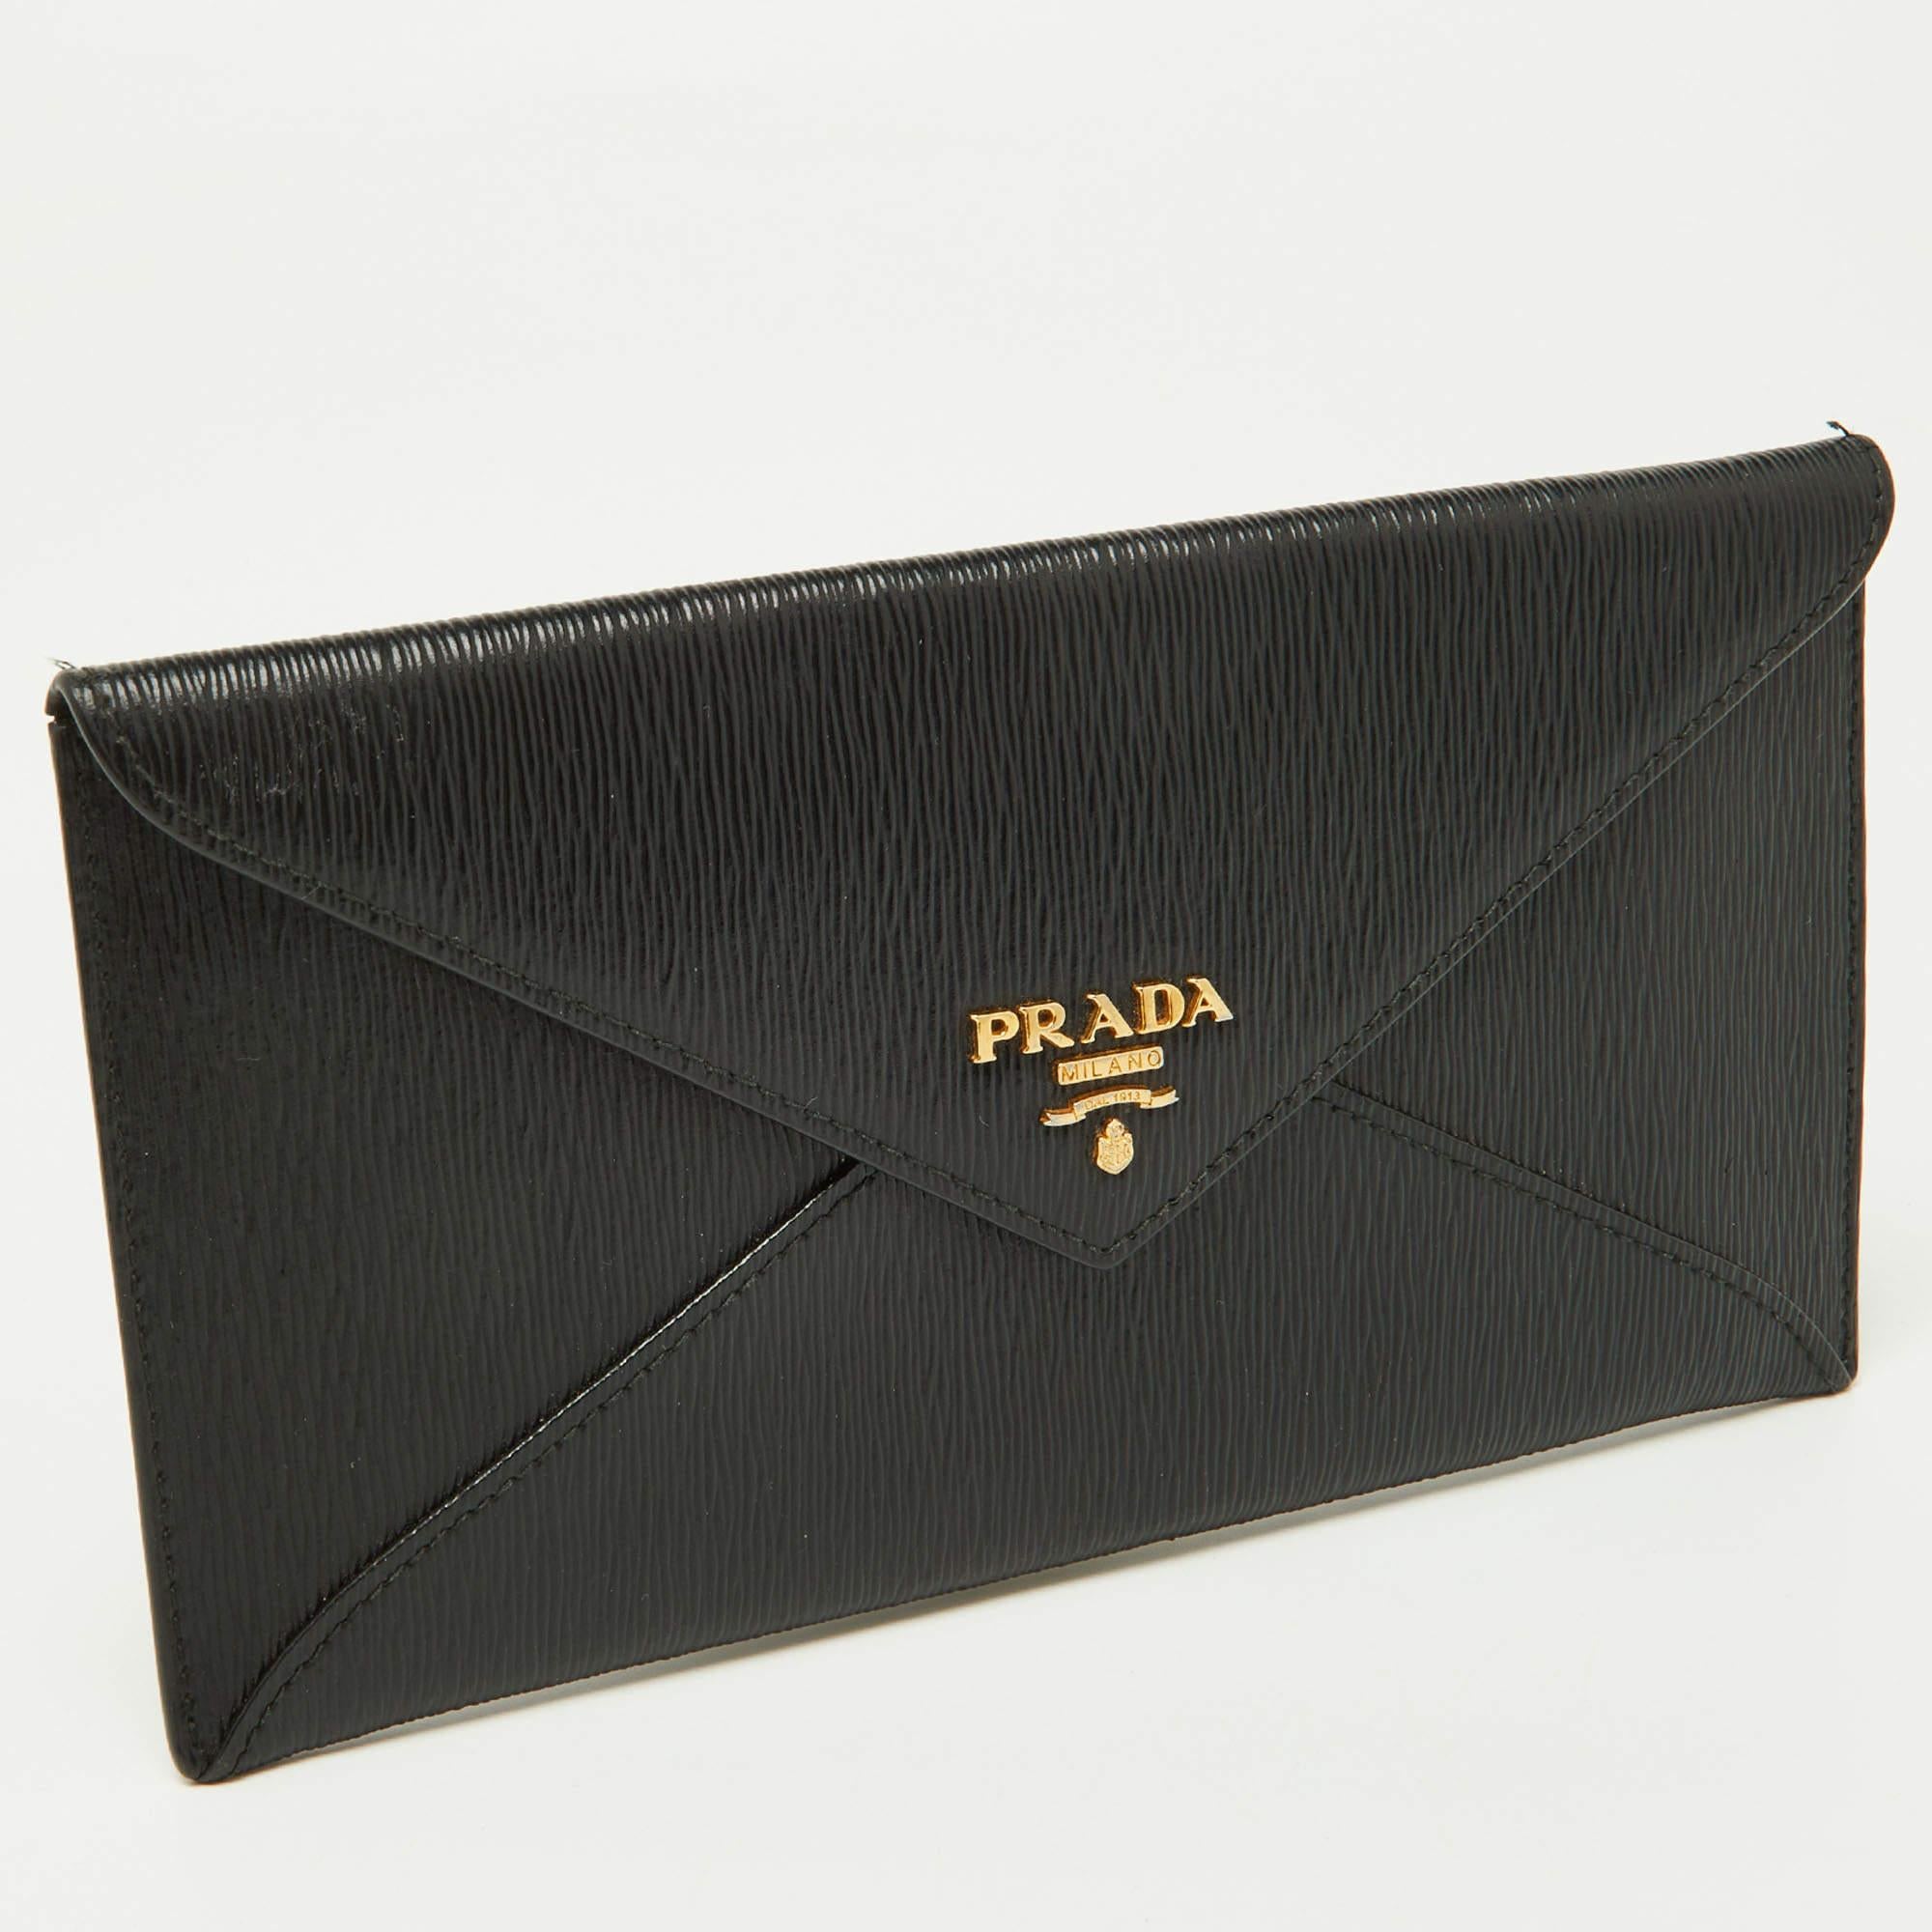 Finely crafted and high in appeal is this envelope wallet by Prada. It has been crafted from Move leather and shaped beautifully. The wallet has a flap with gold-tone logo accents, and it secures the leather interior for your little essentials. This